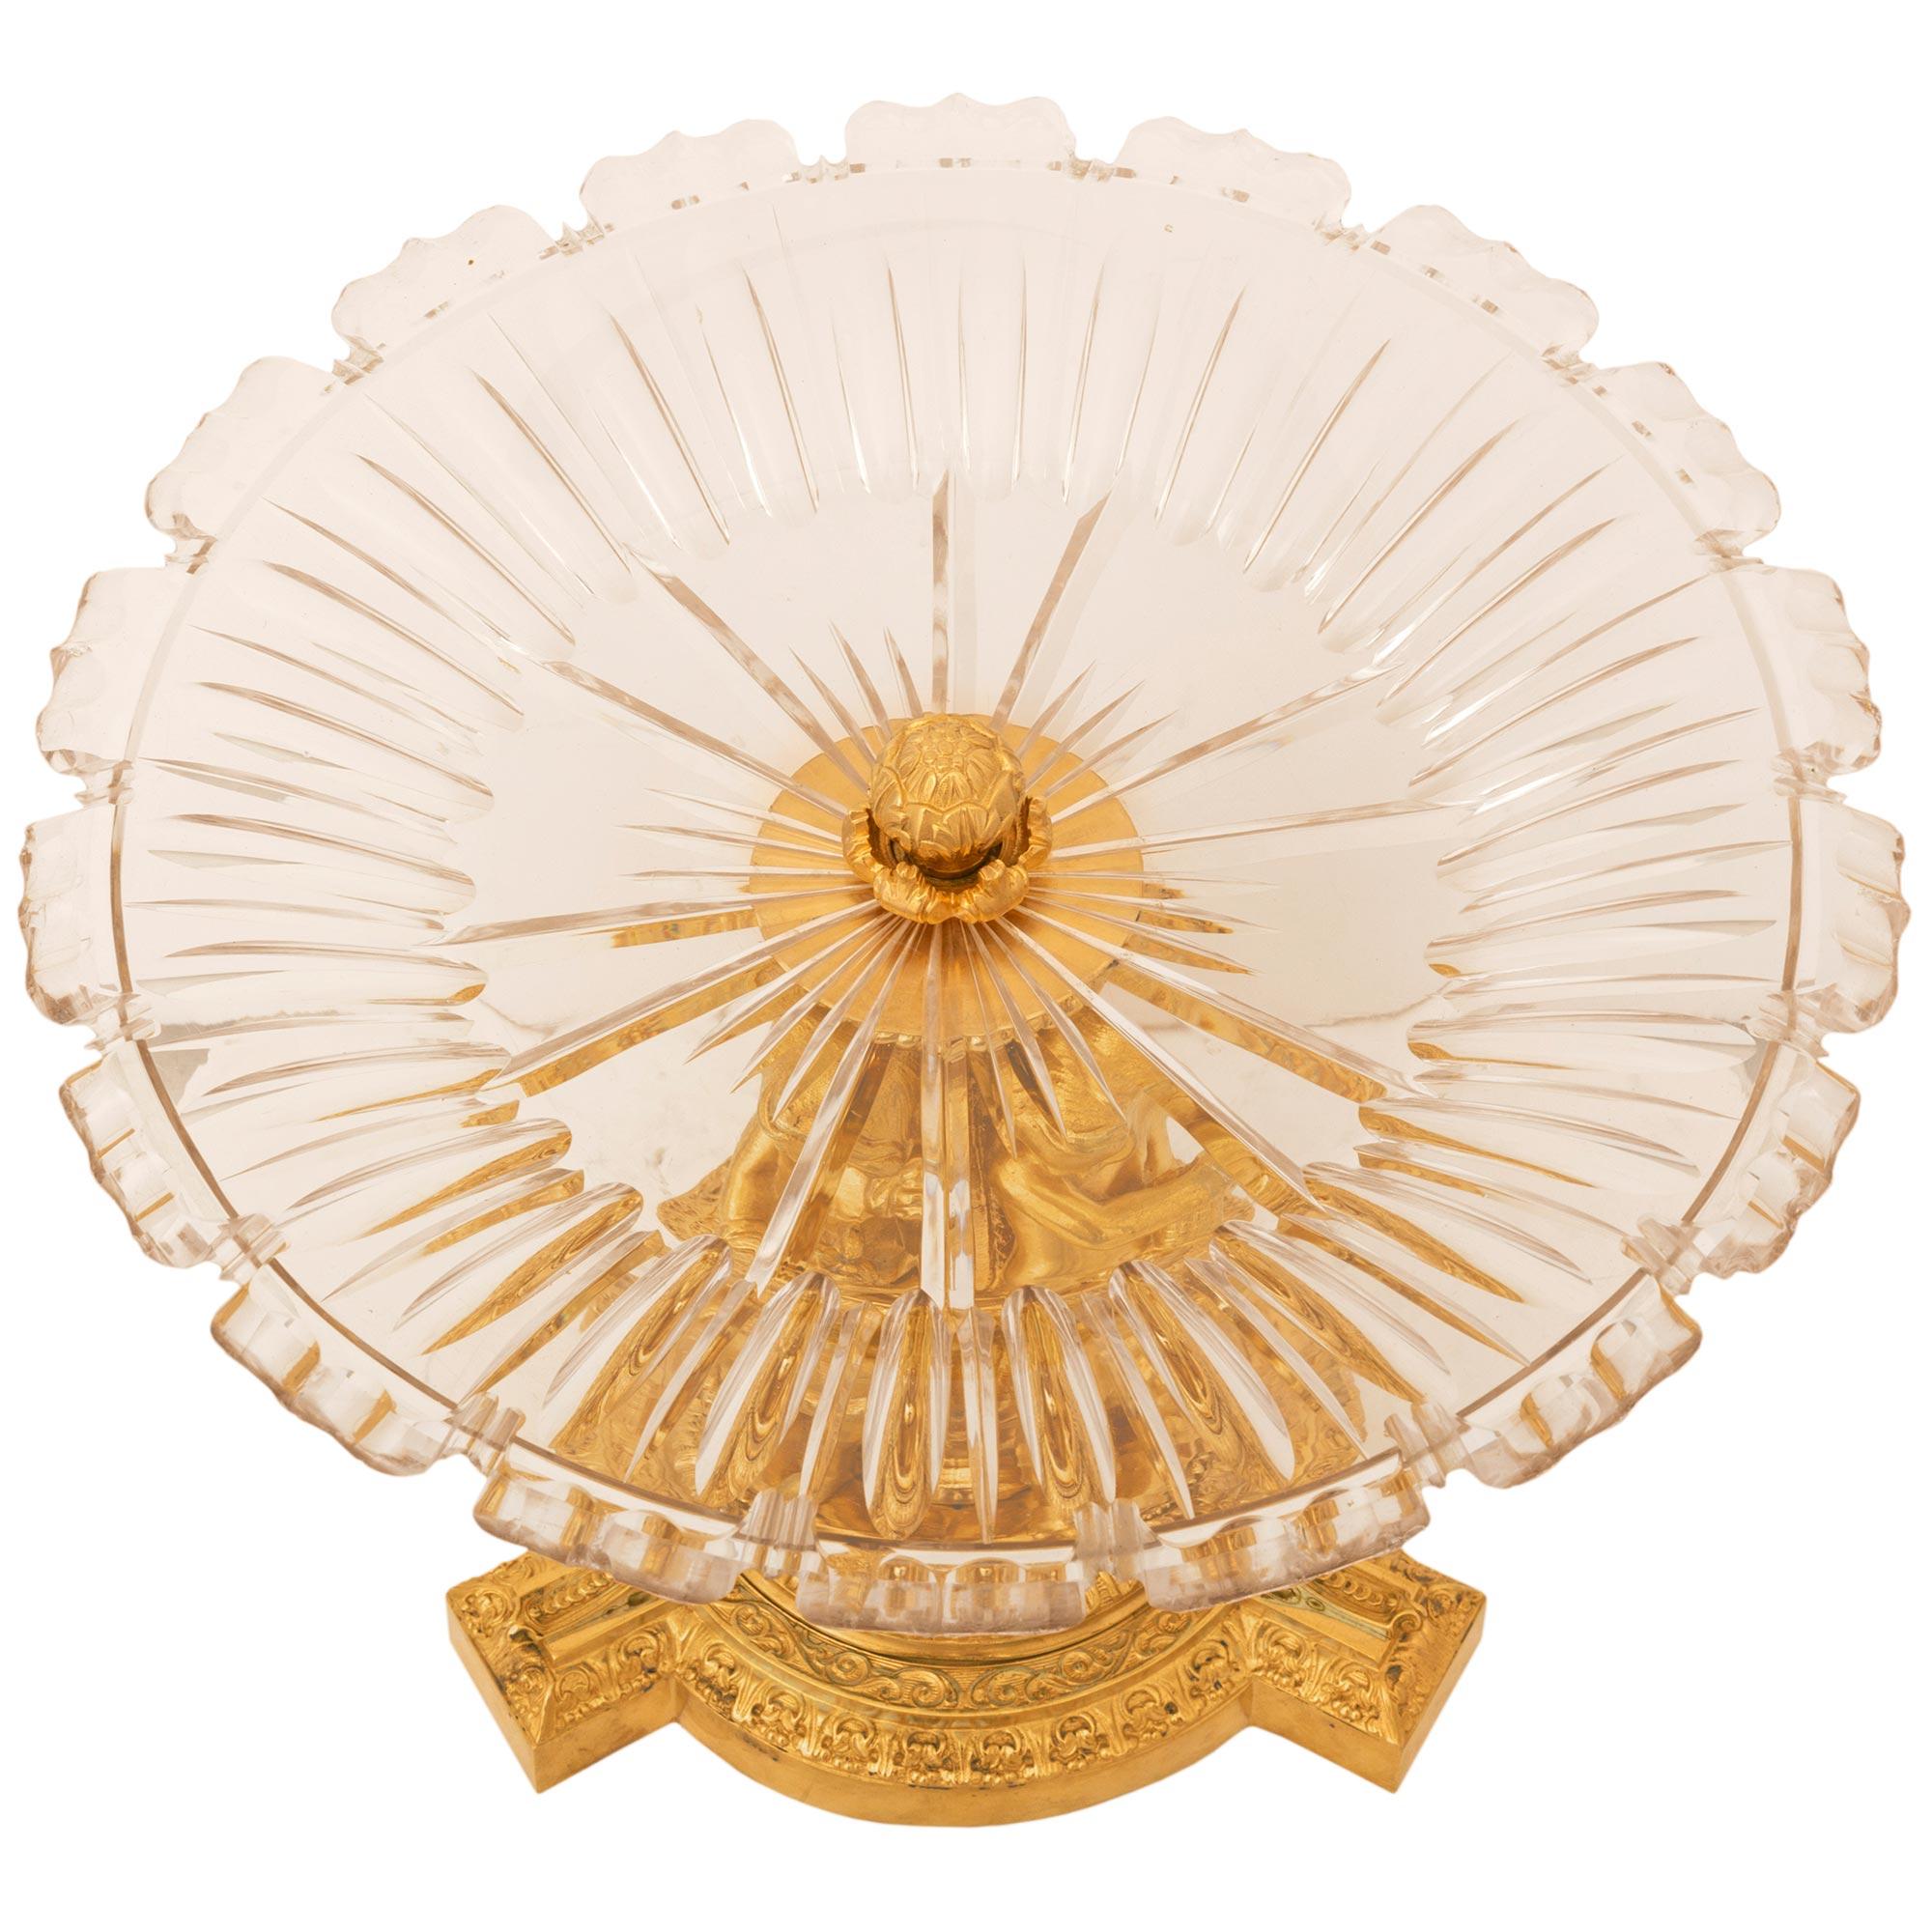 A most elegant French 19th century Louis XVI St. Belle Époque period ormolu and Baccarat crystal centerpiece. The centerpiece is raised by a circular base with three protruding reserves decorated with beautiful finely detailed mottled wrap around